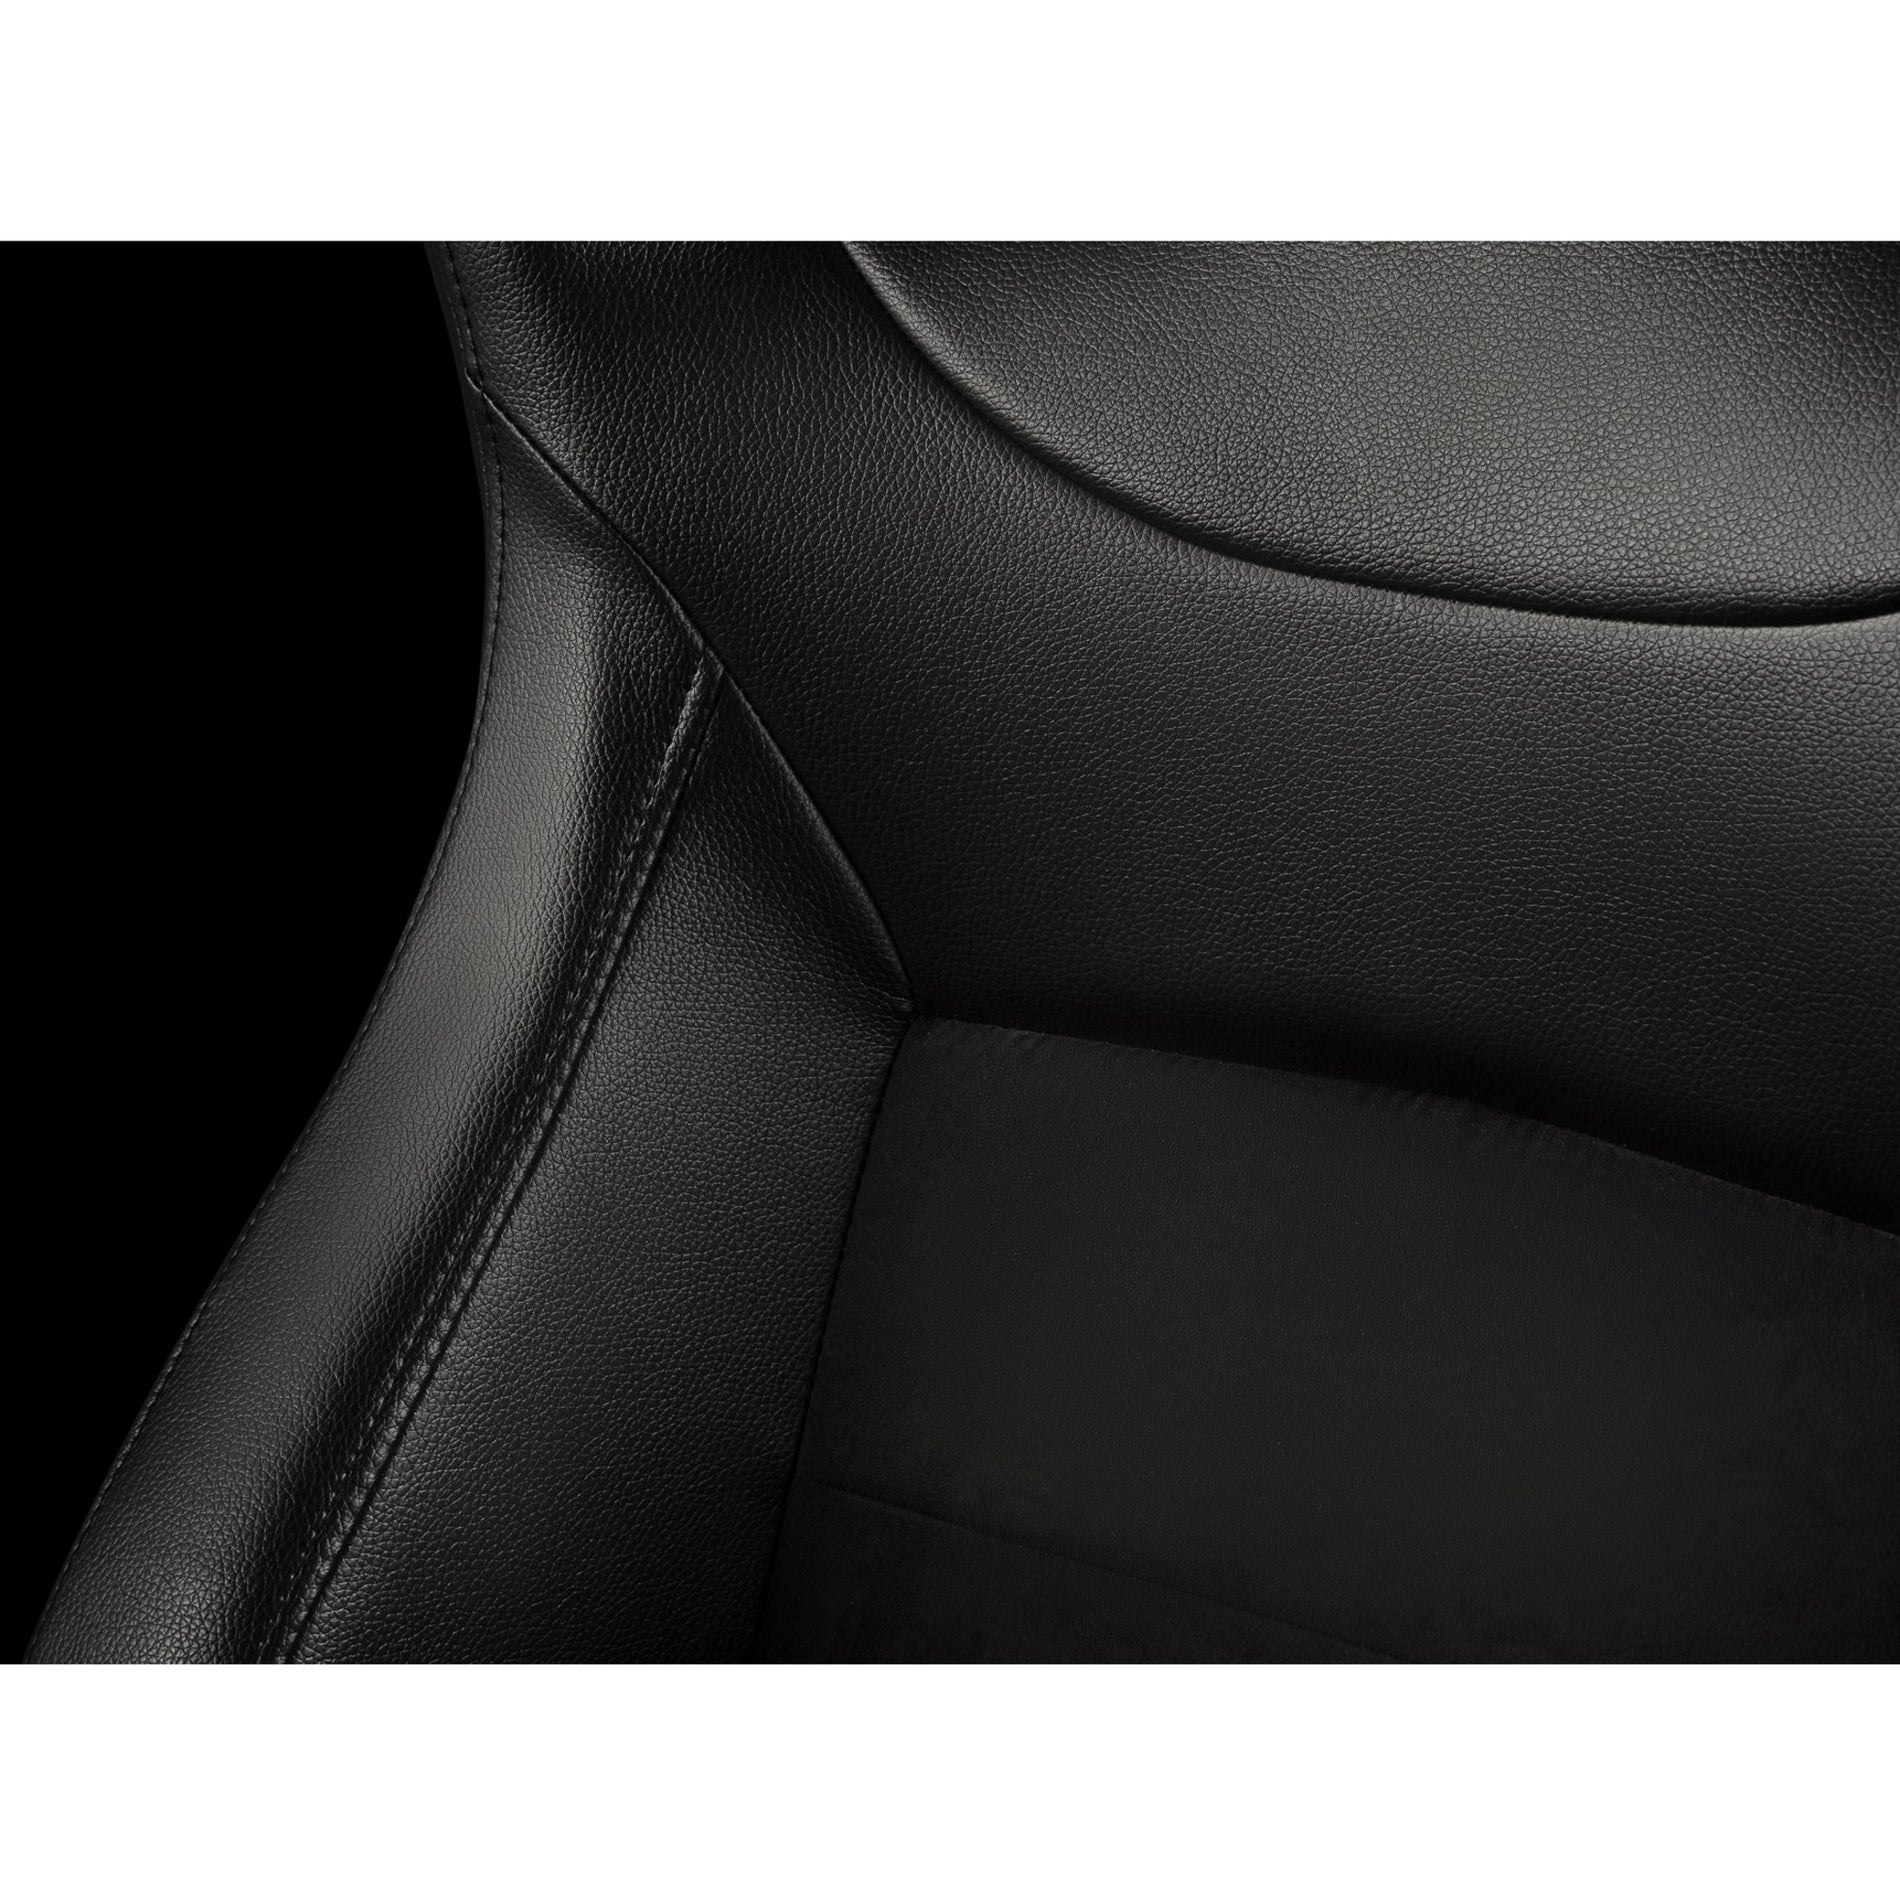 Next Level Racing NLR-S024 GT Seat Add On for Wheel Stand DD / 2.0, Gaming Cockpit Upgrade